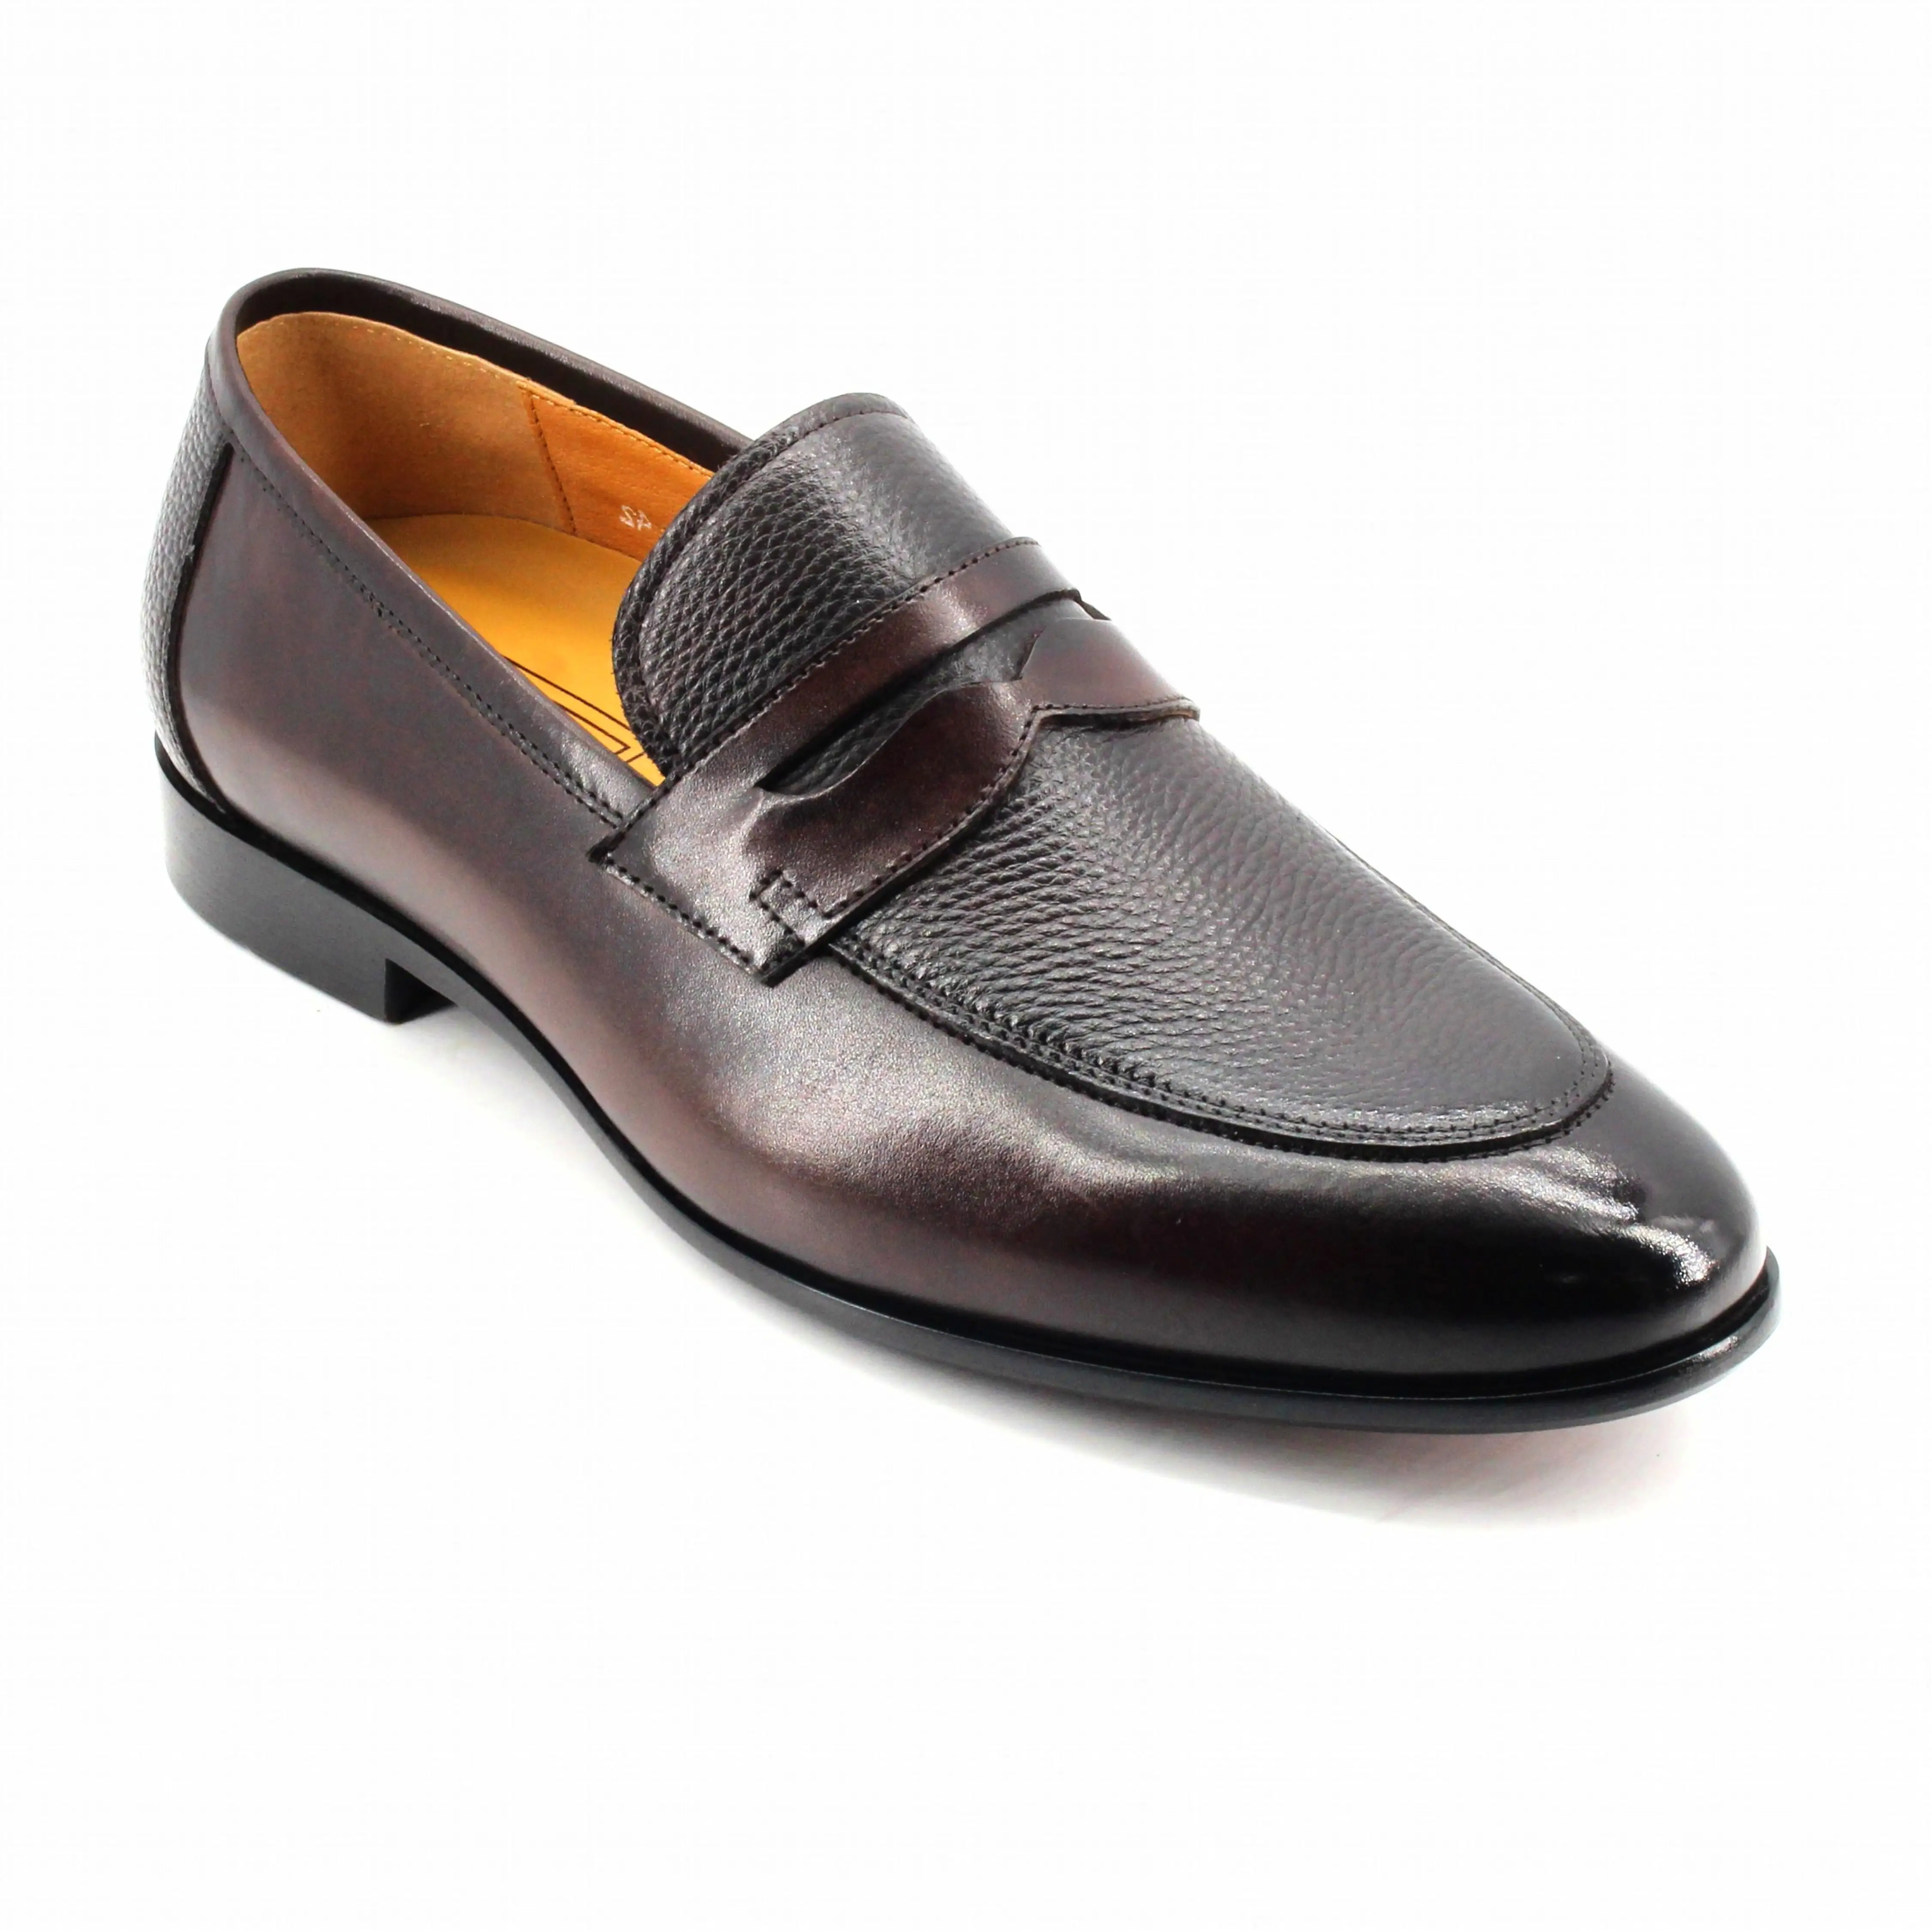 Boricia High quality shoes luxury formal leather shoes men's leather shoes for office